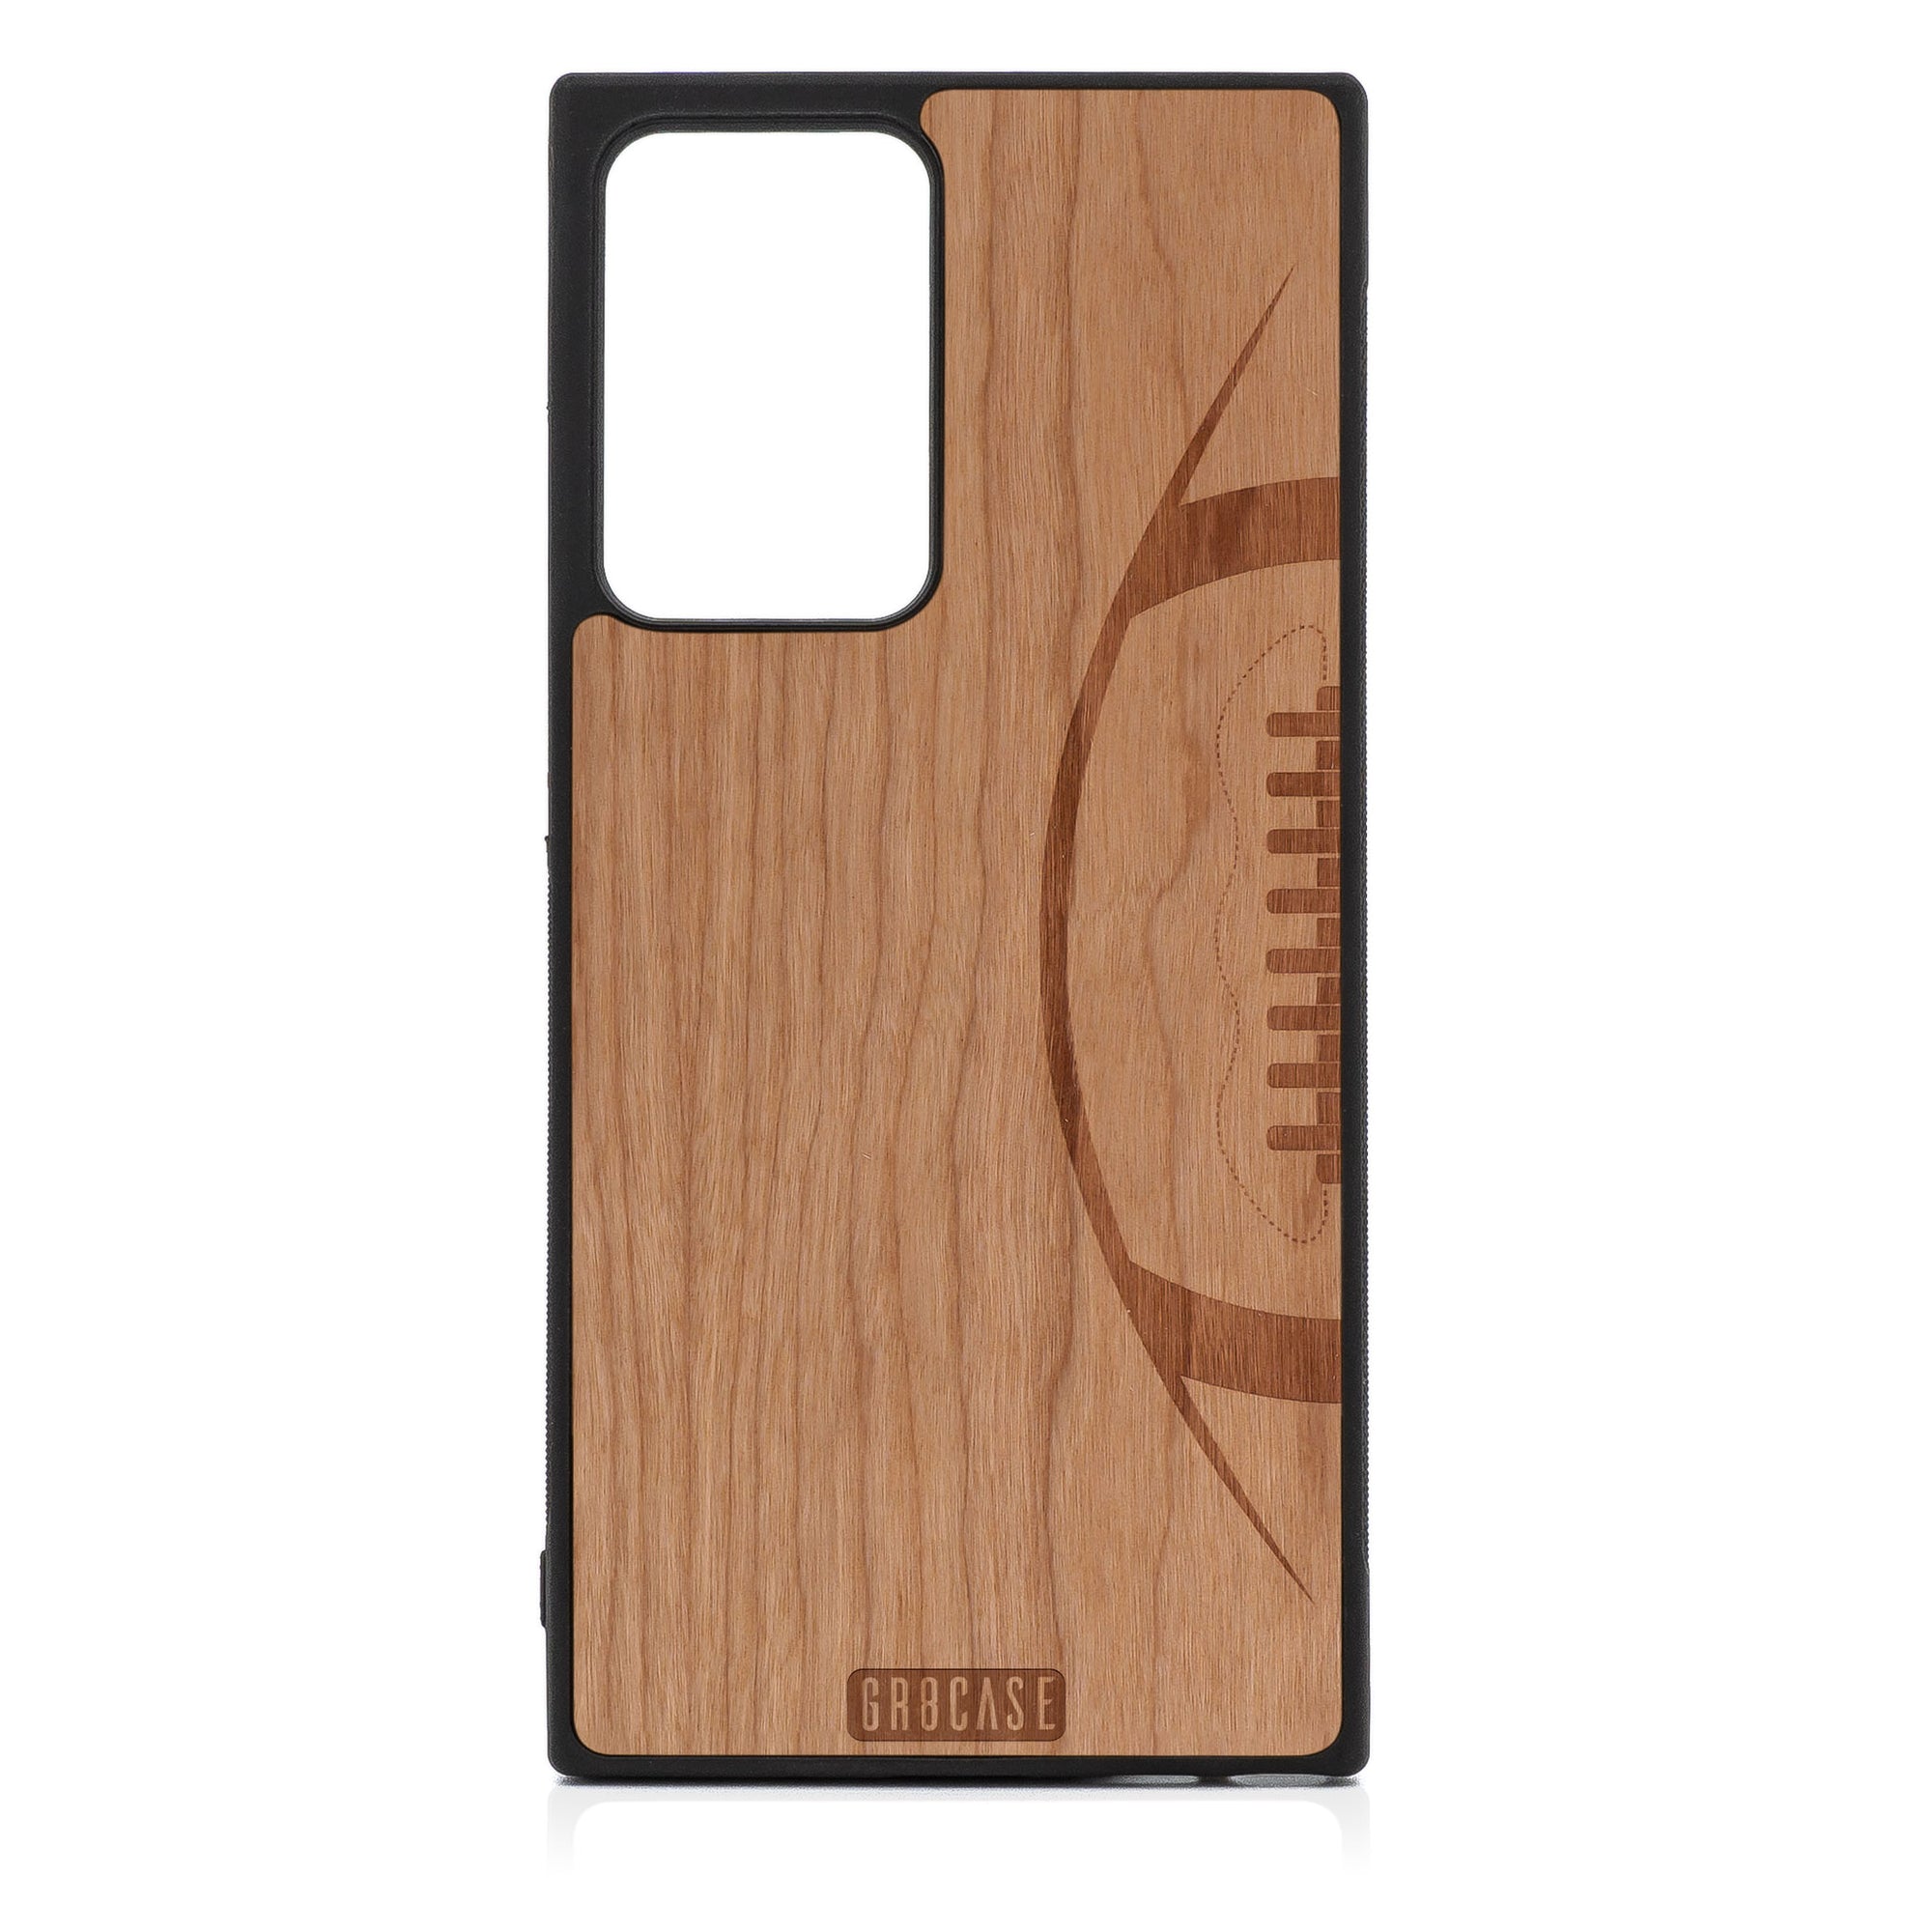 Football Design Wood Case For Samsung Galaxy Note 20 Ultra